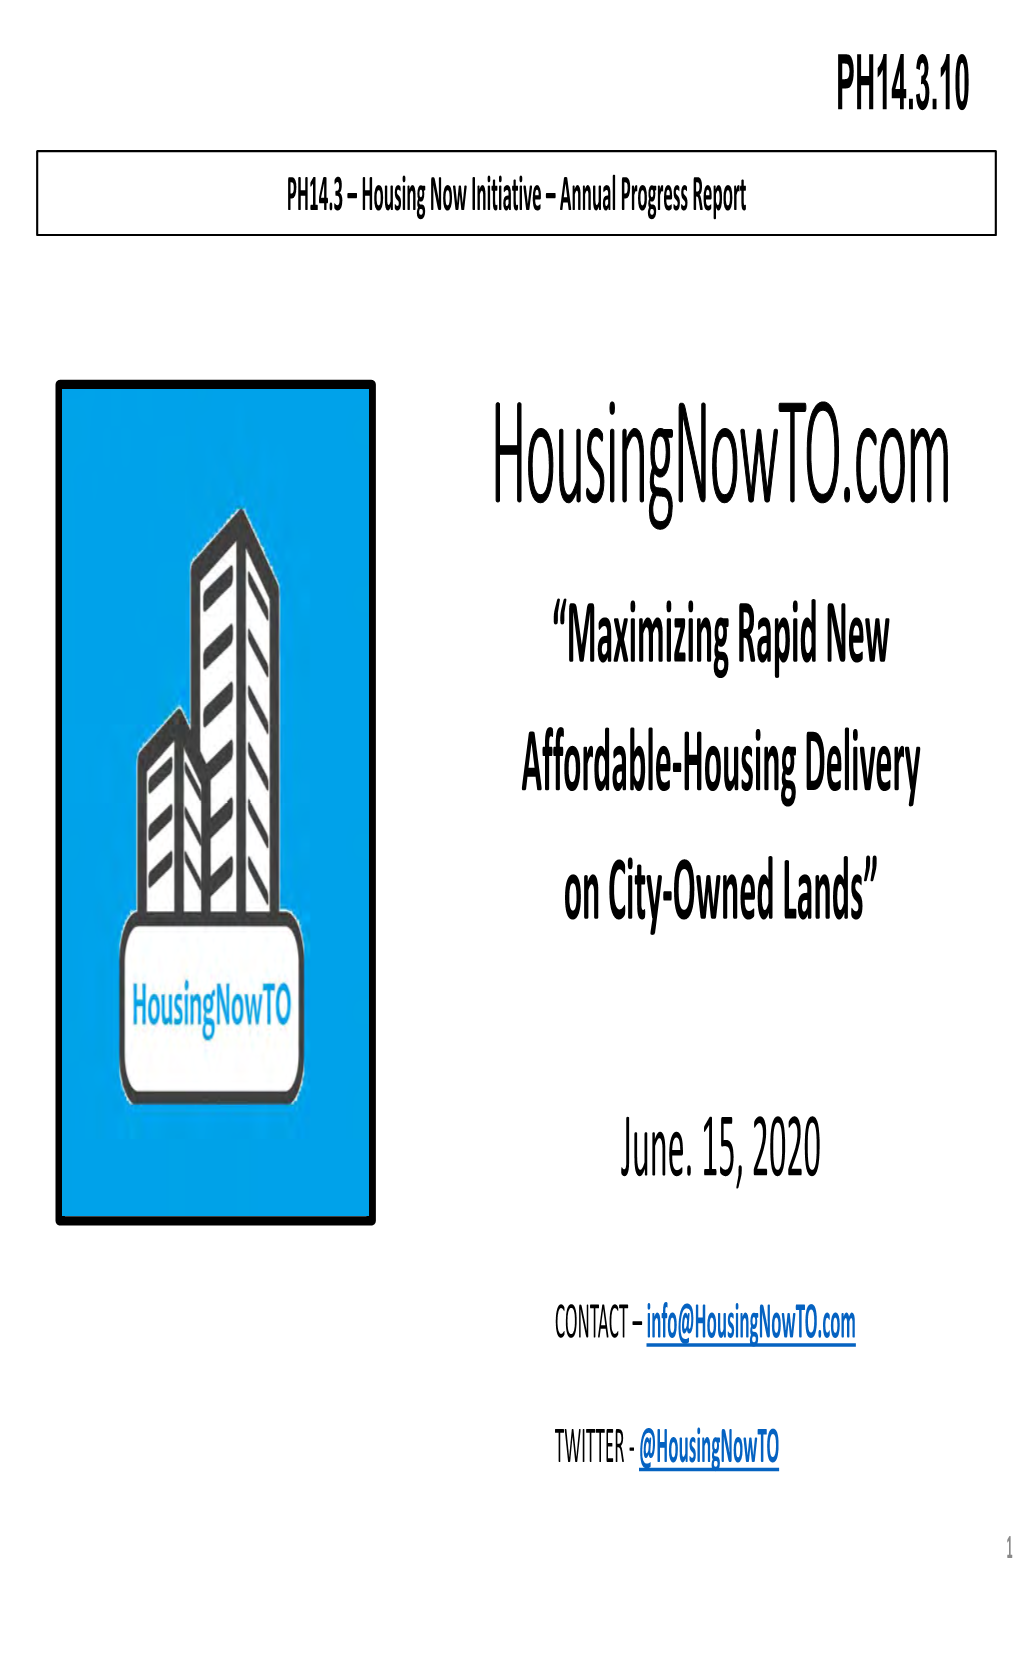 Housingnowto.Com “Maximizing Rapid New Affordable‐Housing Delivery on City‐Owned Lands”